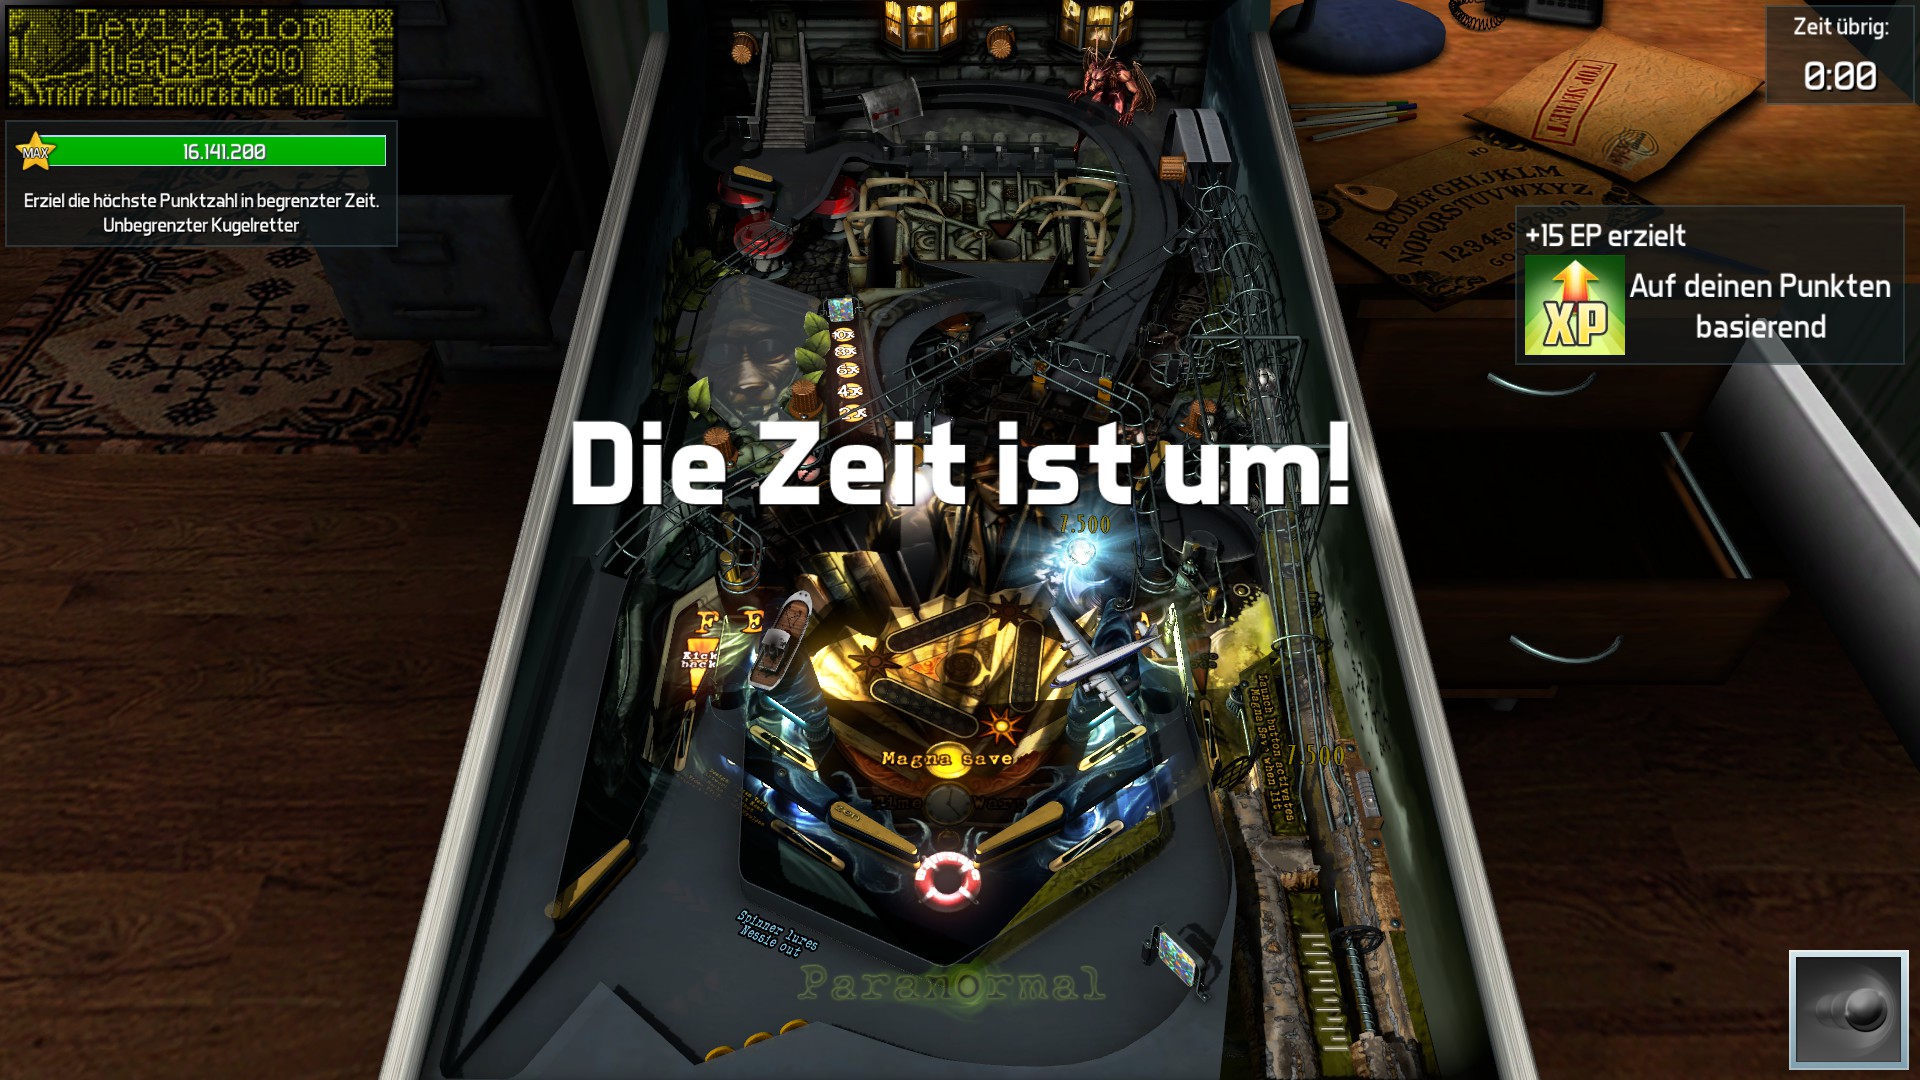 e2e4: Pinball FX3: Paranormal [5 Minute] (PC) 16,141,200 points on 2022-05-29 09:12:13